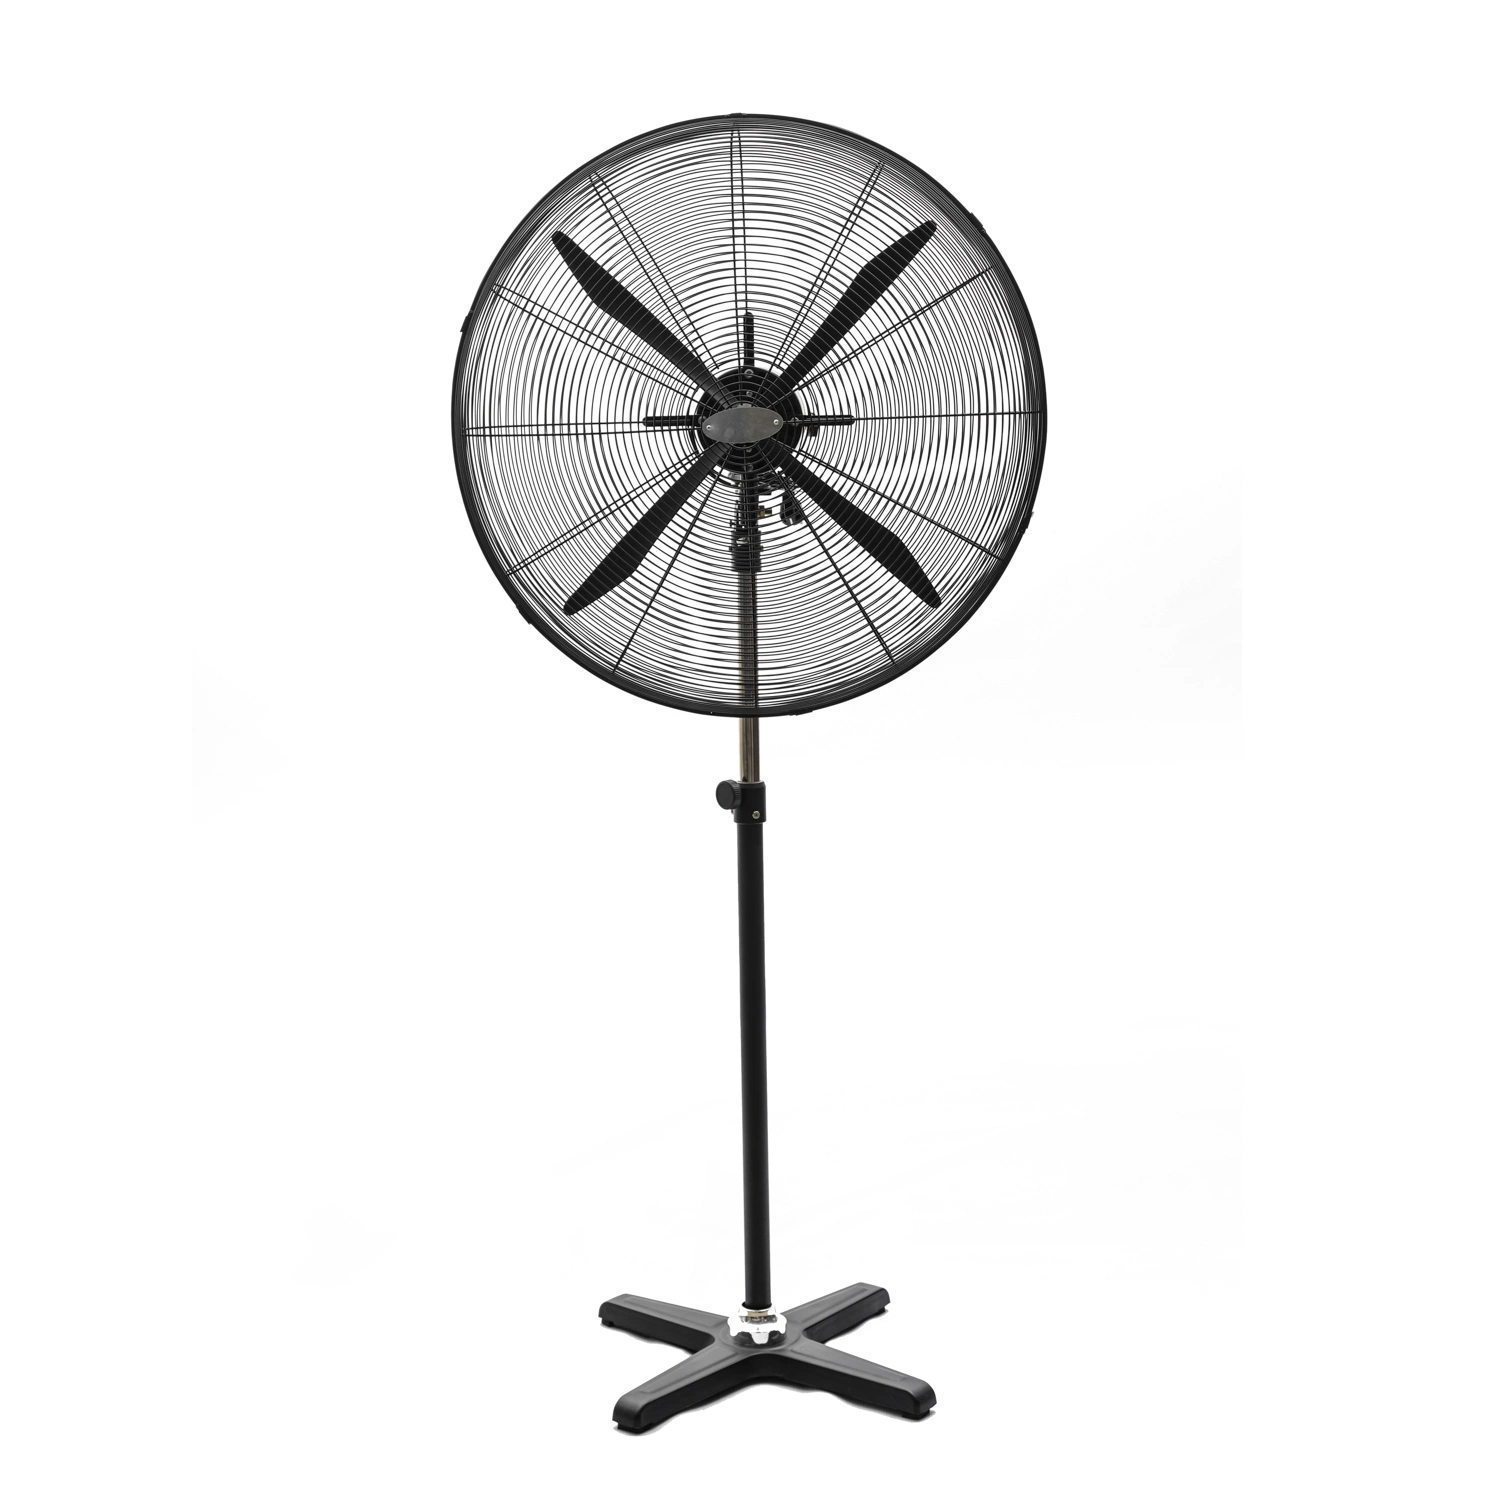 FL 75cm Electric Industrial Pedestal Stand Ventilation Exhaust Fan with CB